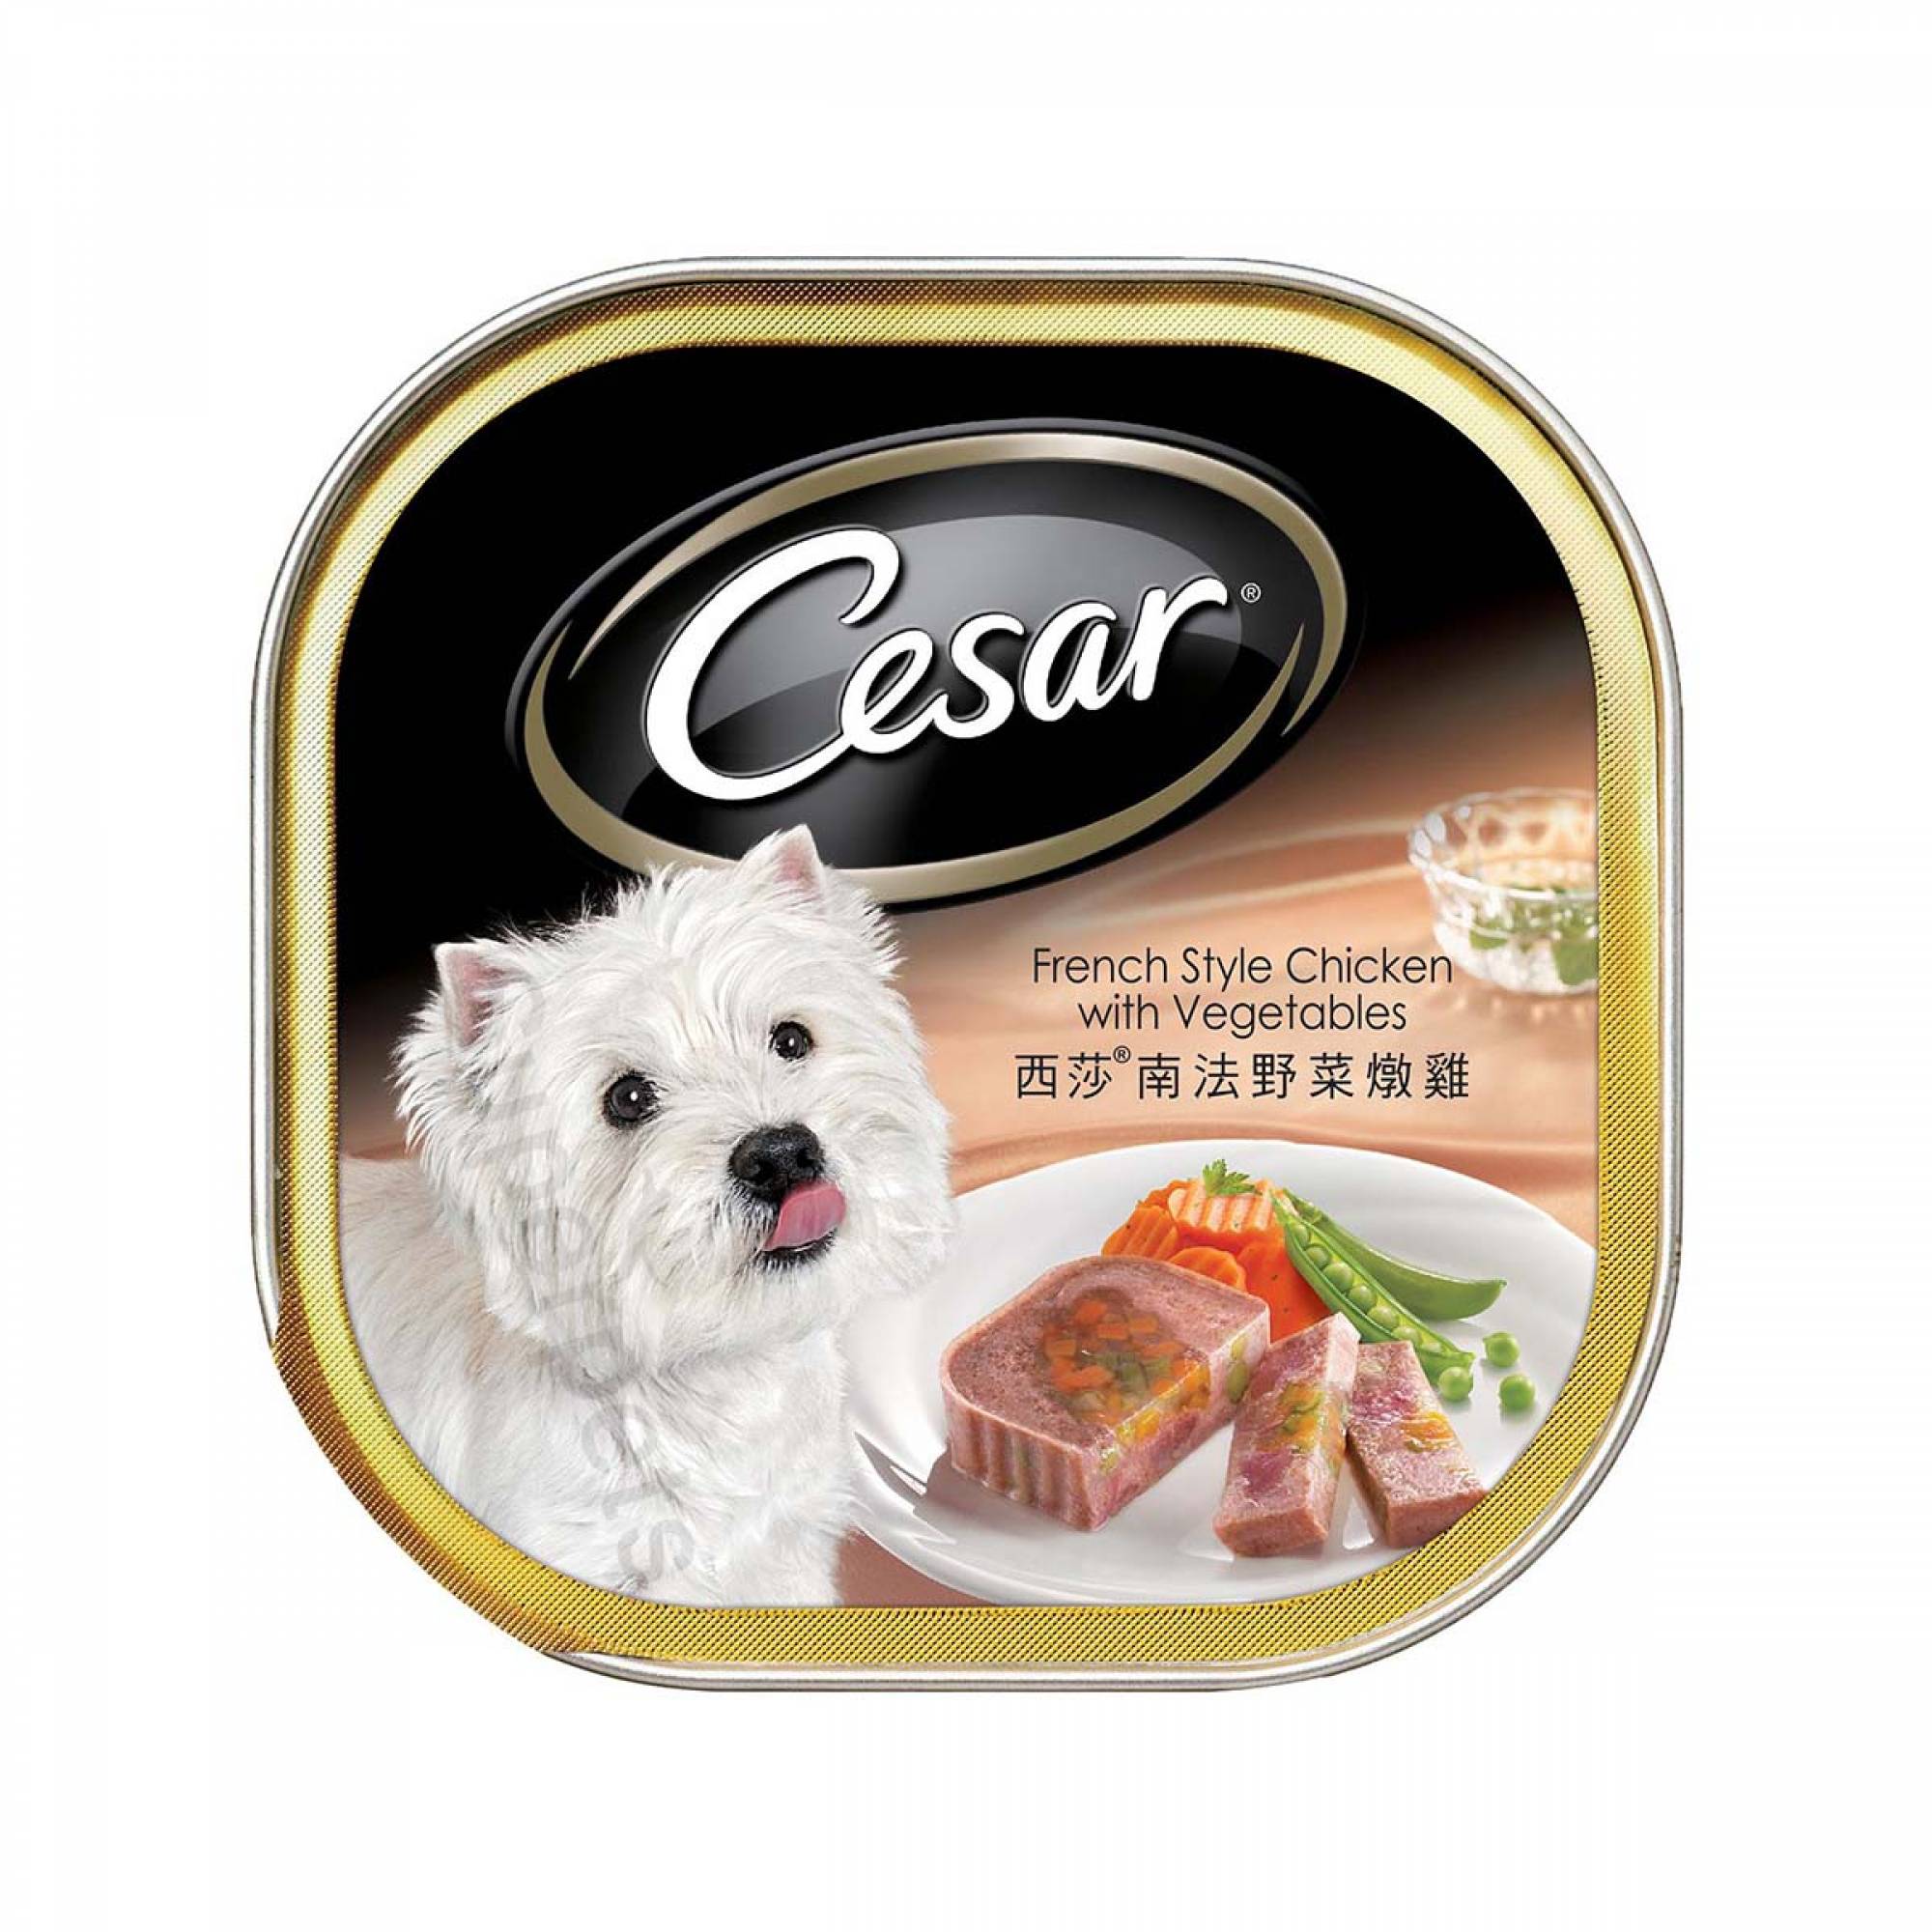 Cesar - French Style Chicken with Vegetables Pate Dog Food 100g